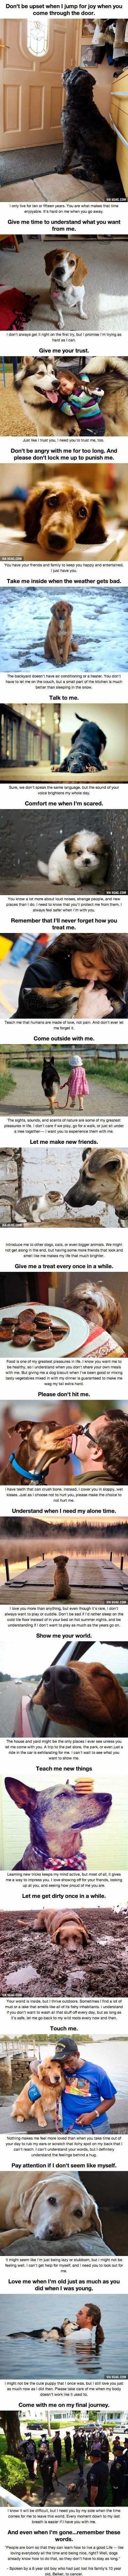 An emotional realization for dogs. :( #DogLover #A...